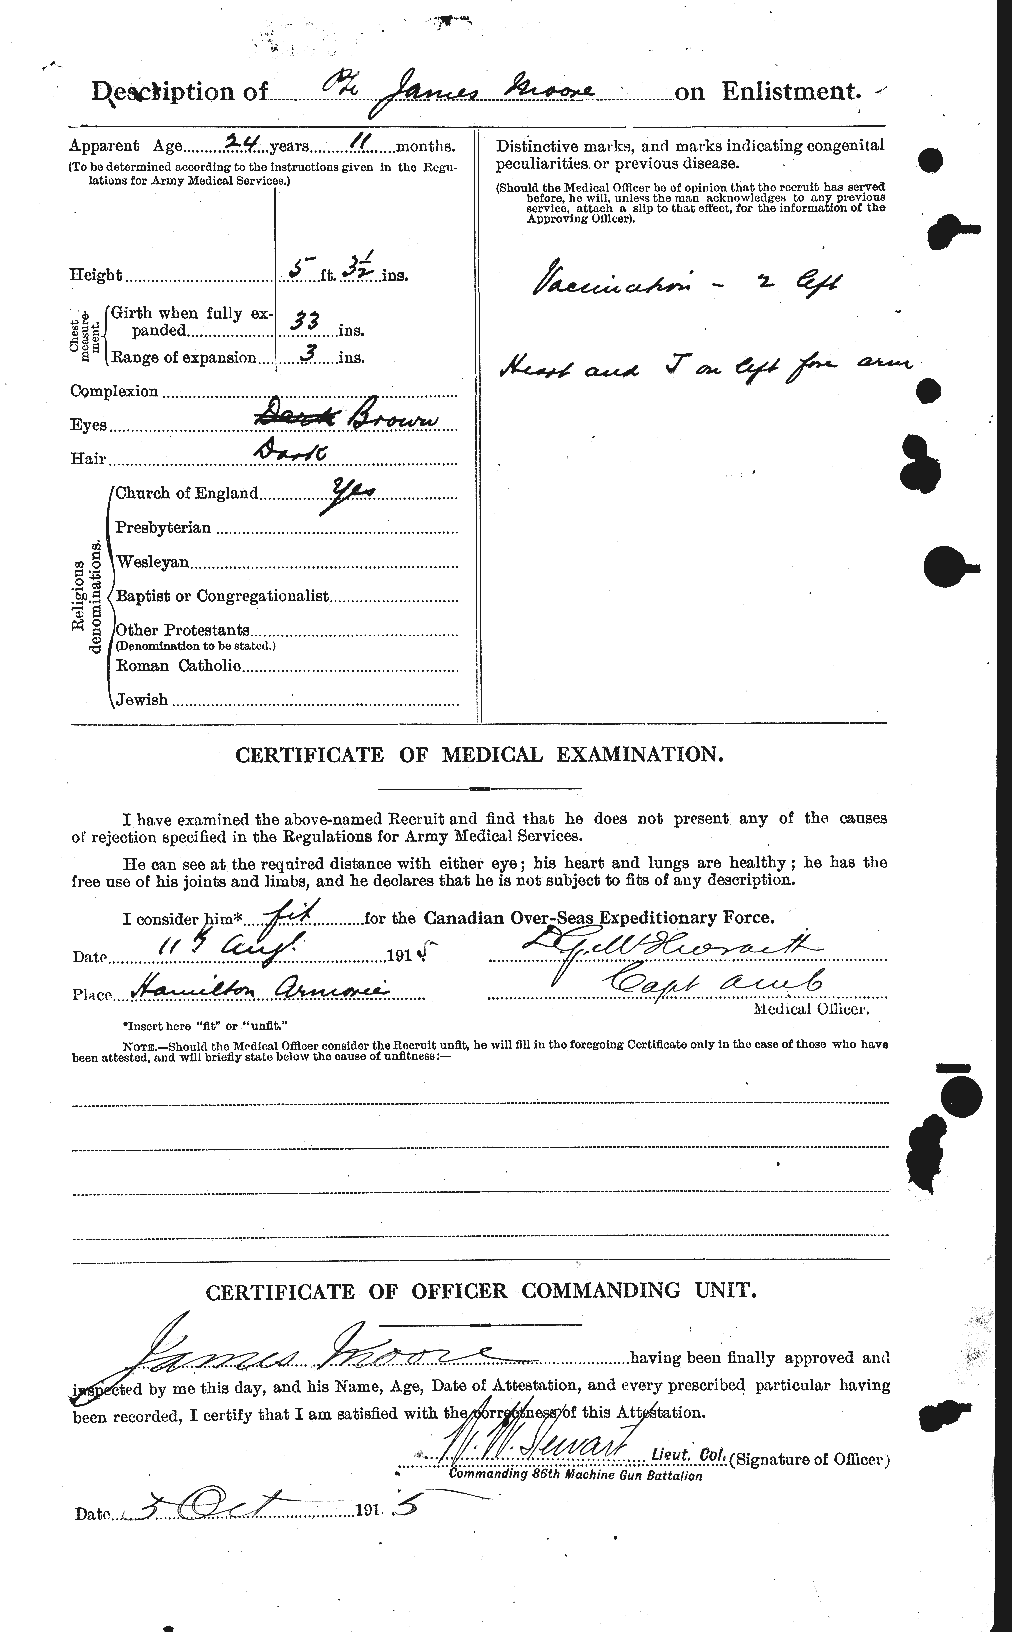 Personnel Records of the First World War - CEF 502181b